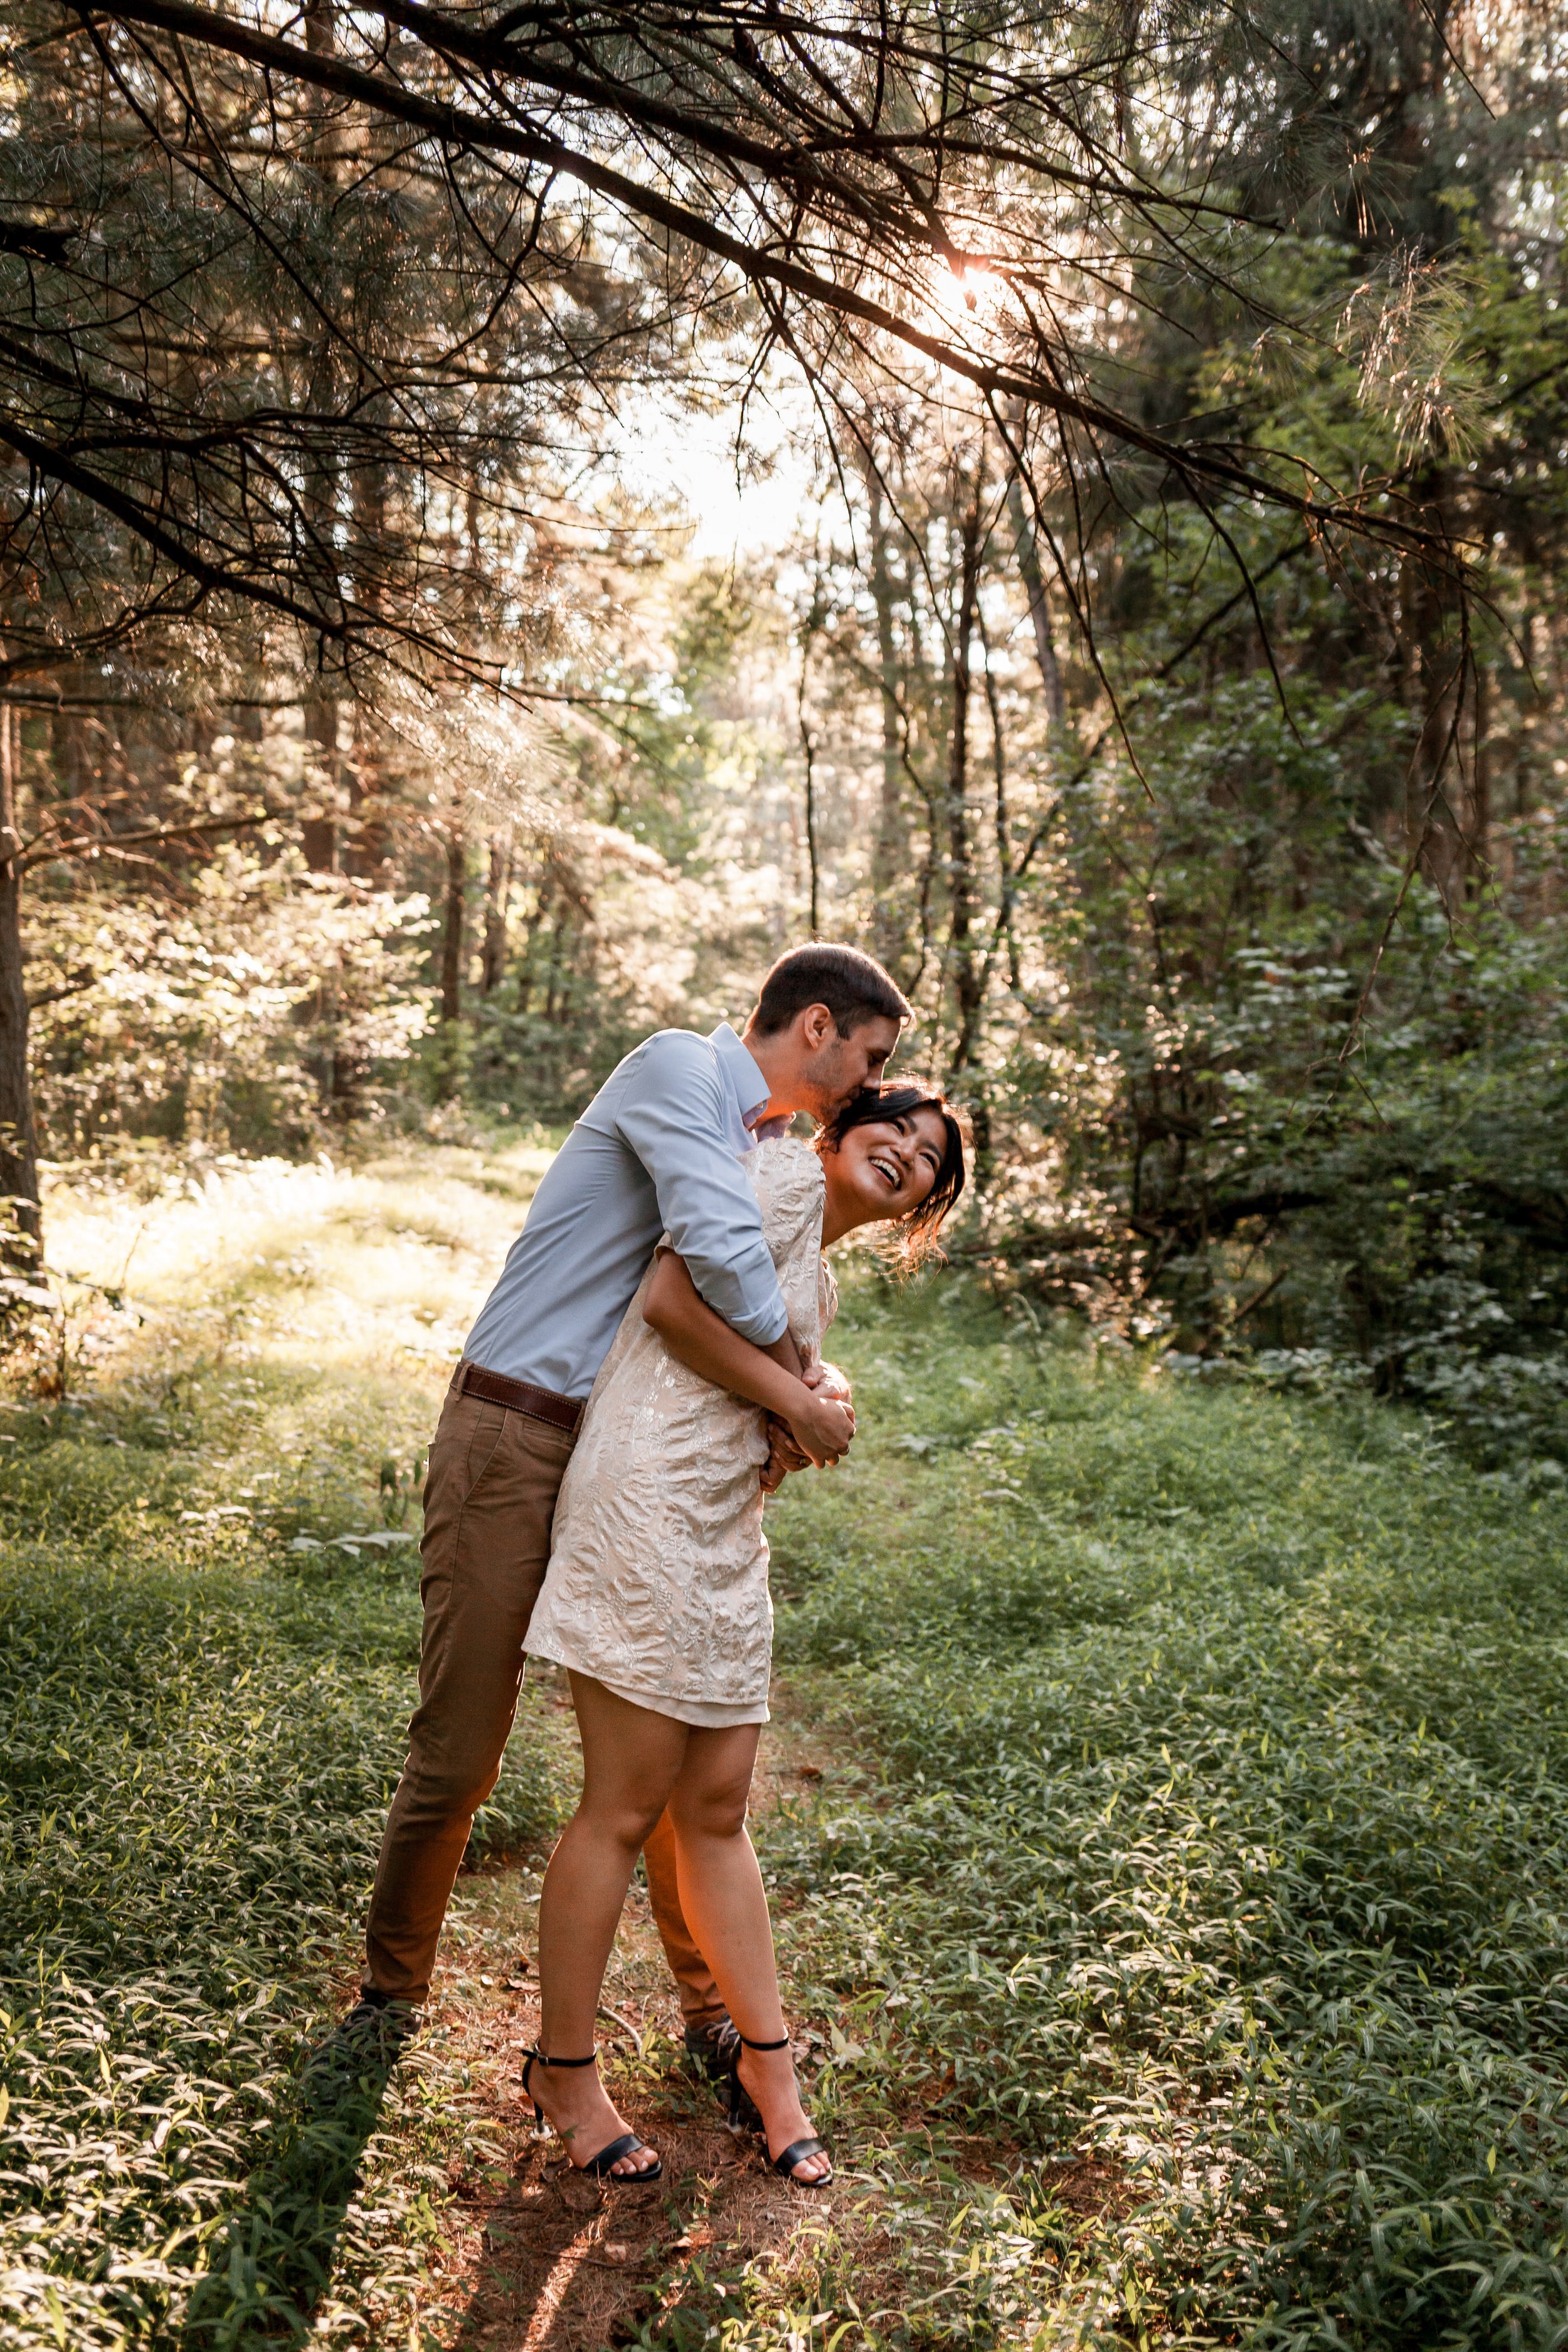 A man and woman hugging in the woods.